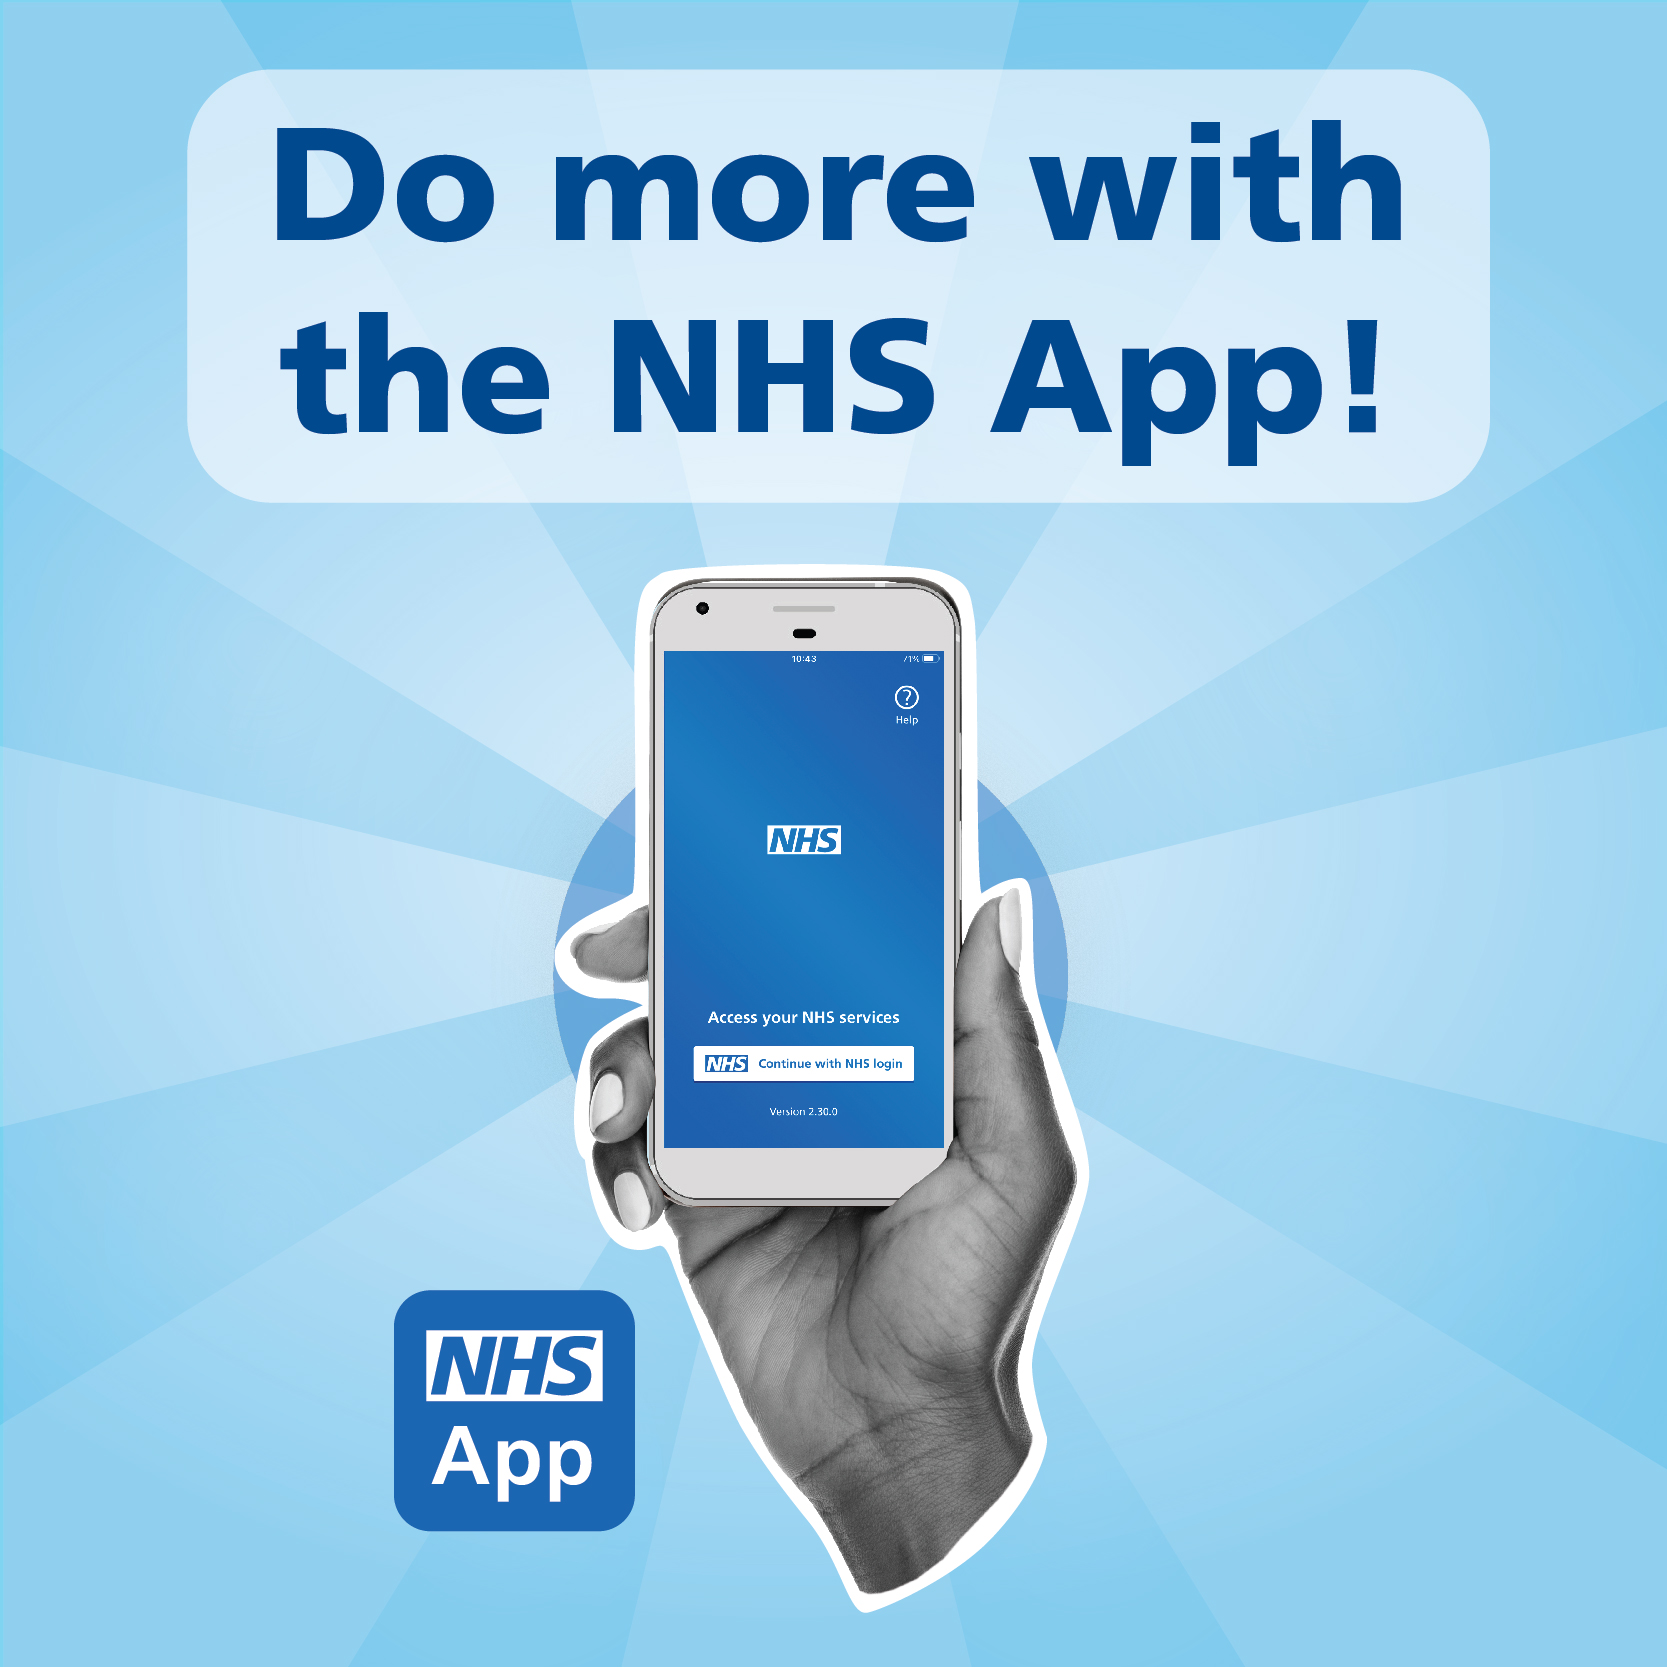 Do more with the NHS App